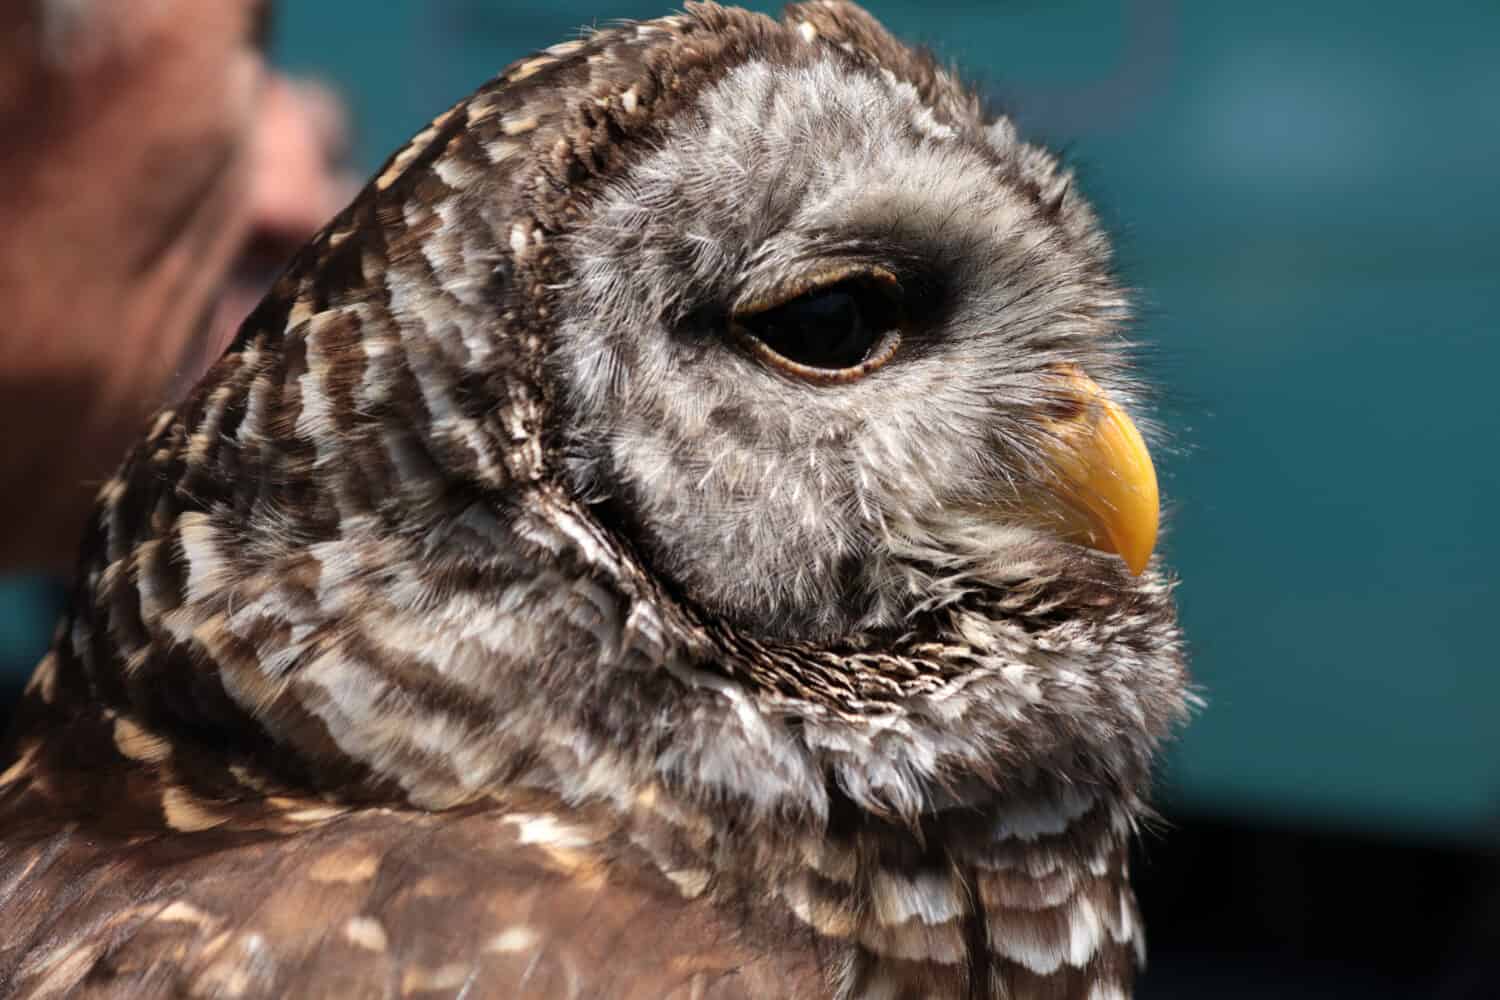 Barred owl close up at Suffolk (Virginia) Earth and Arts Festival.